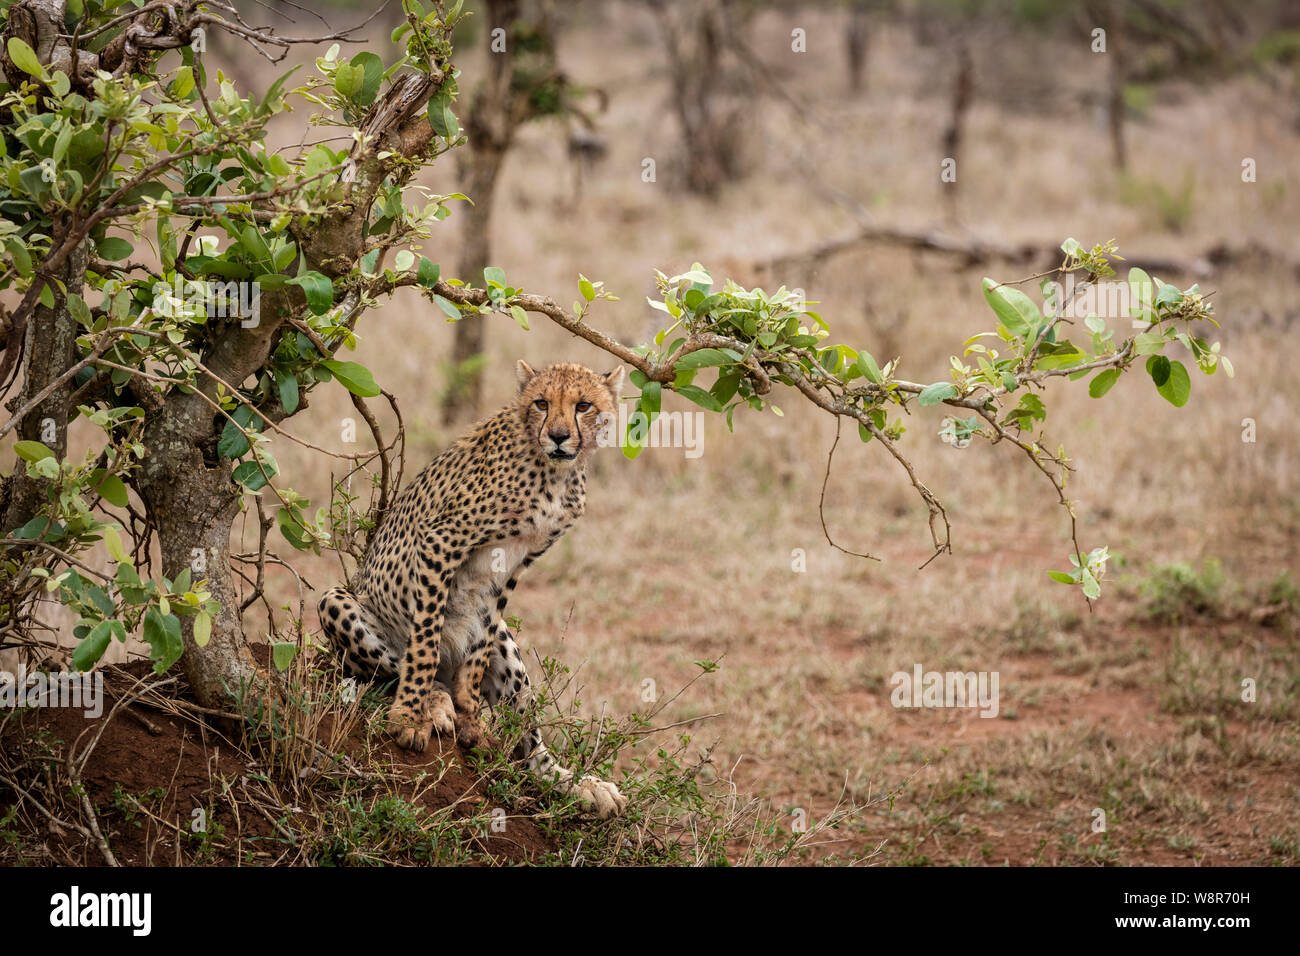 A cheetah in Kruger National Park, South Africa Stock Photo